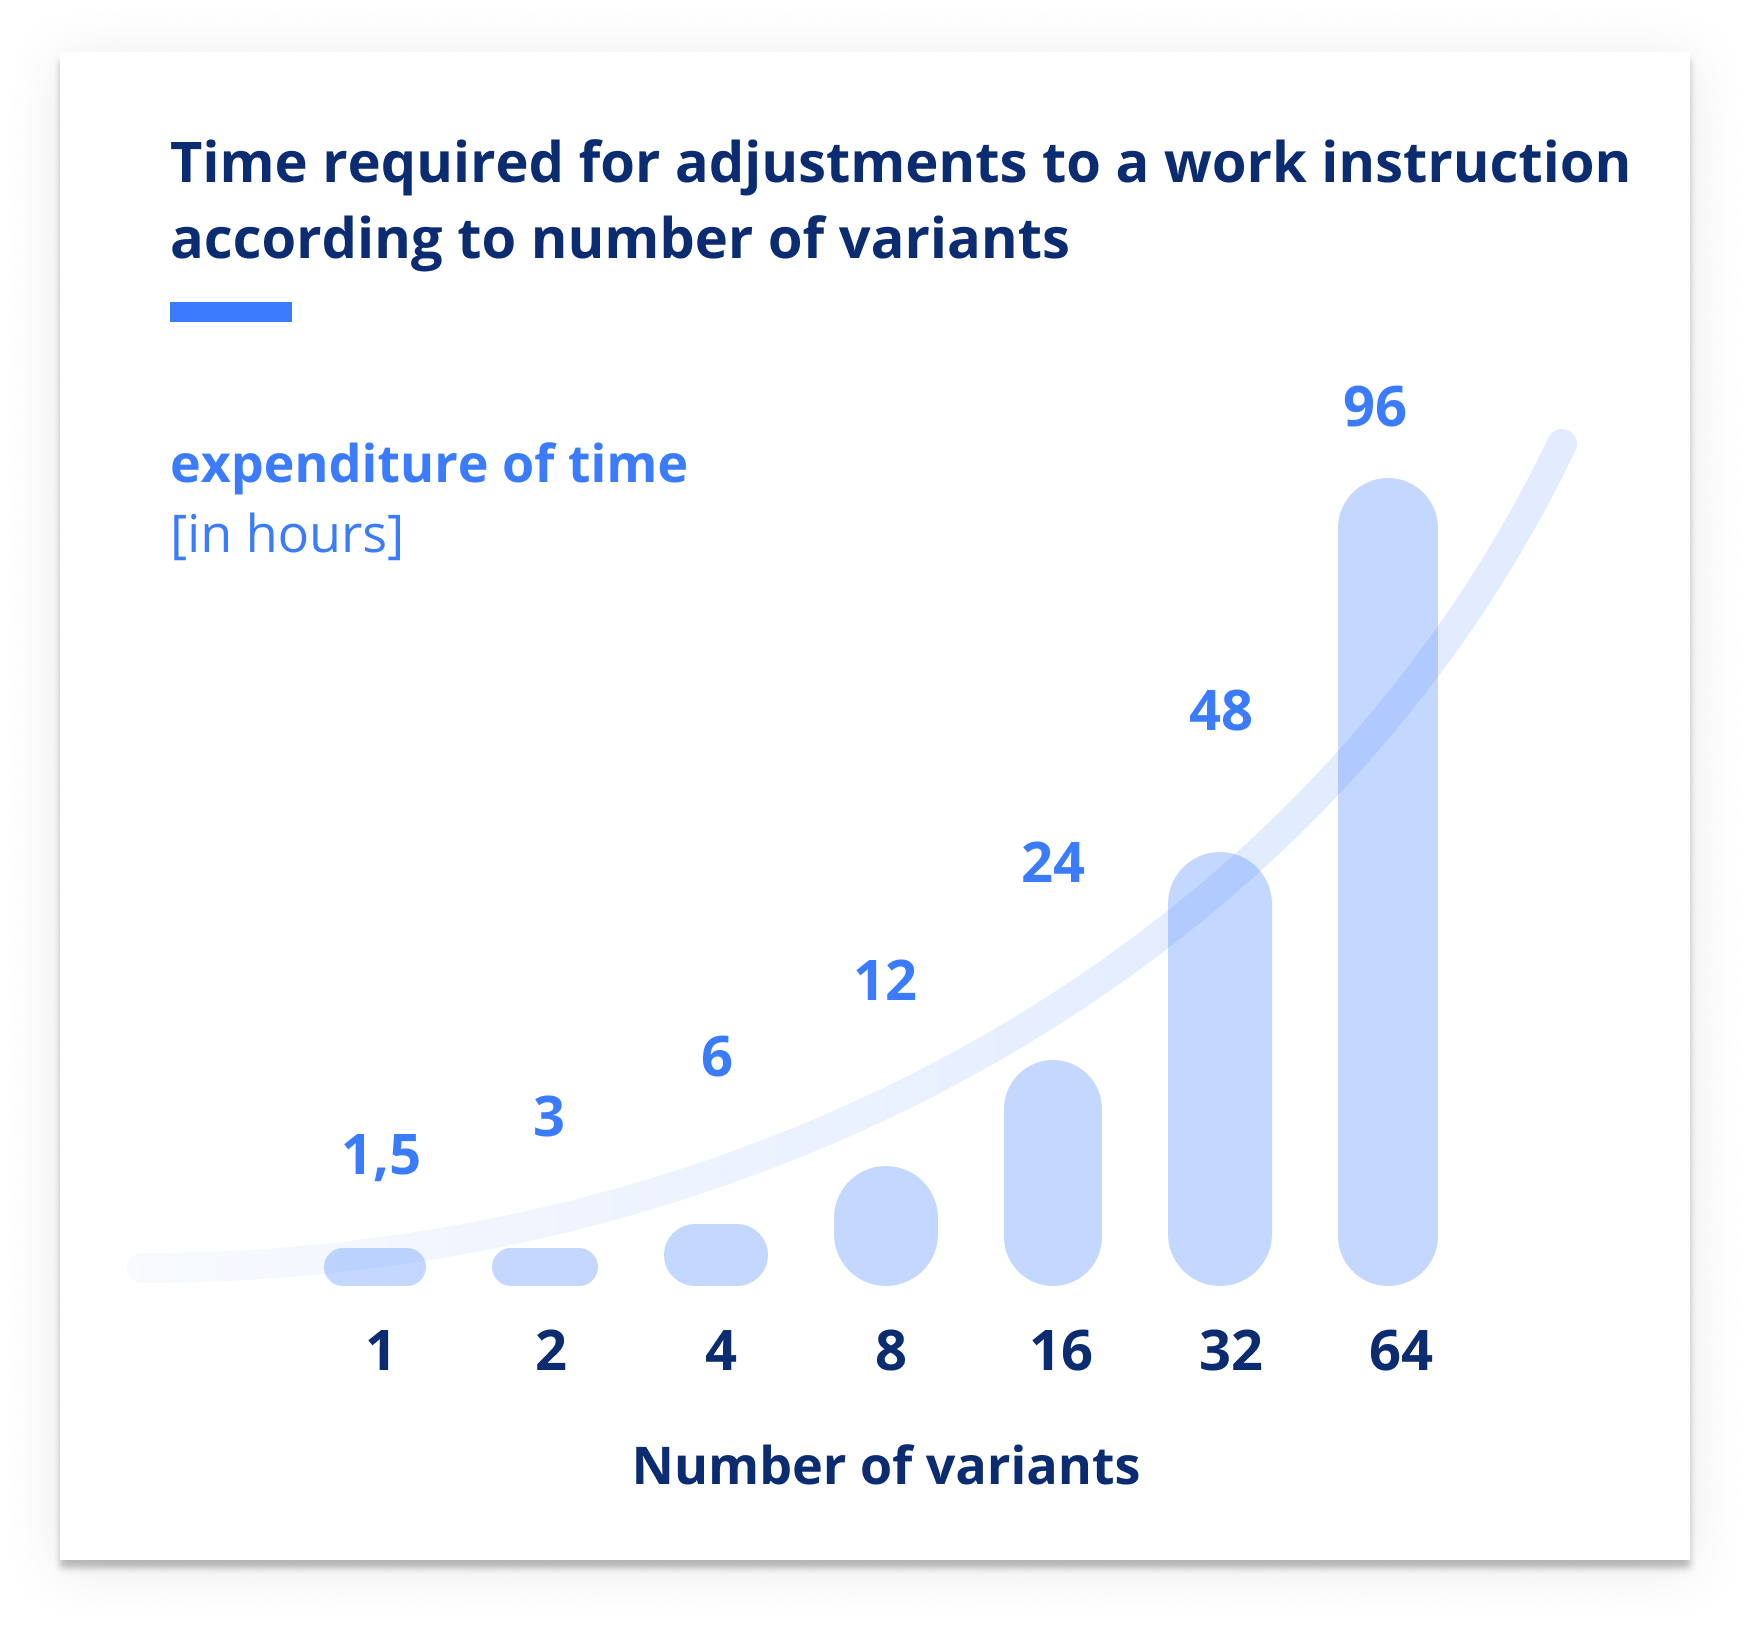 Time required for adjustment by number of variants graph